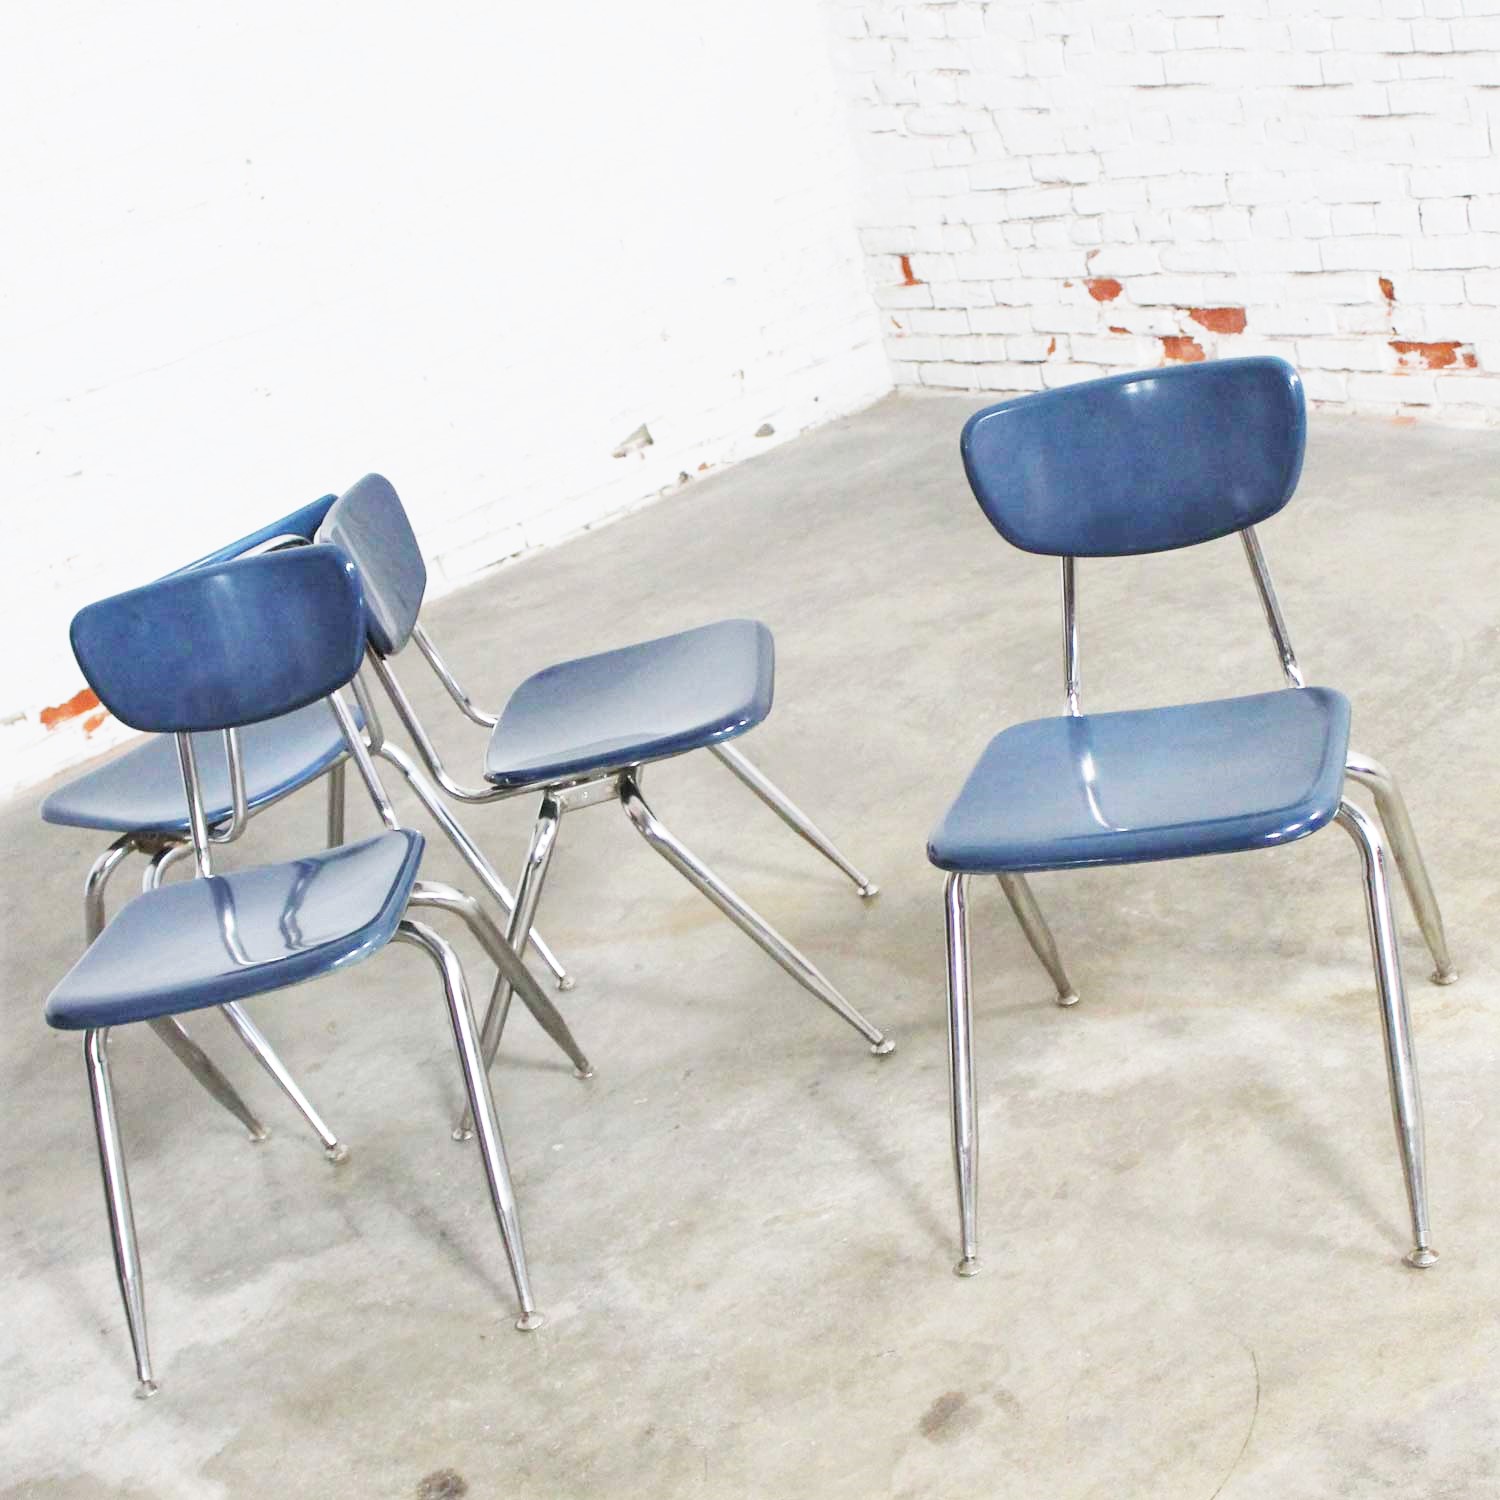 Virco 3000 Series Hard Plastic and Chrome Chairs in Navy Blue